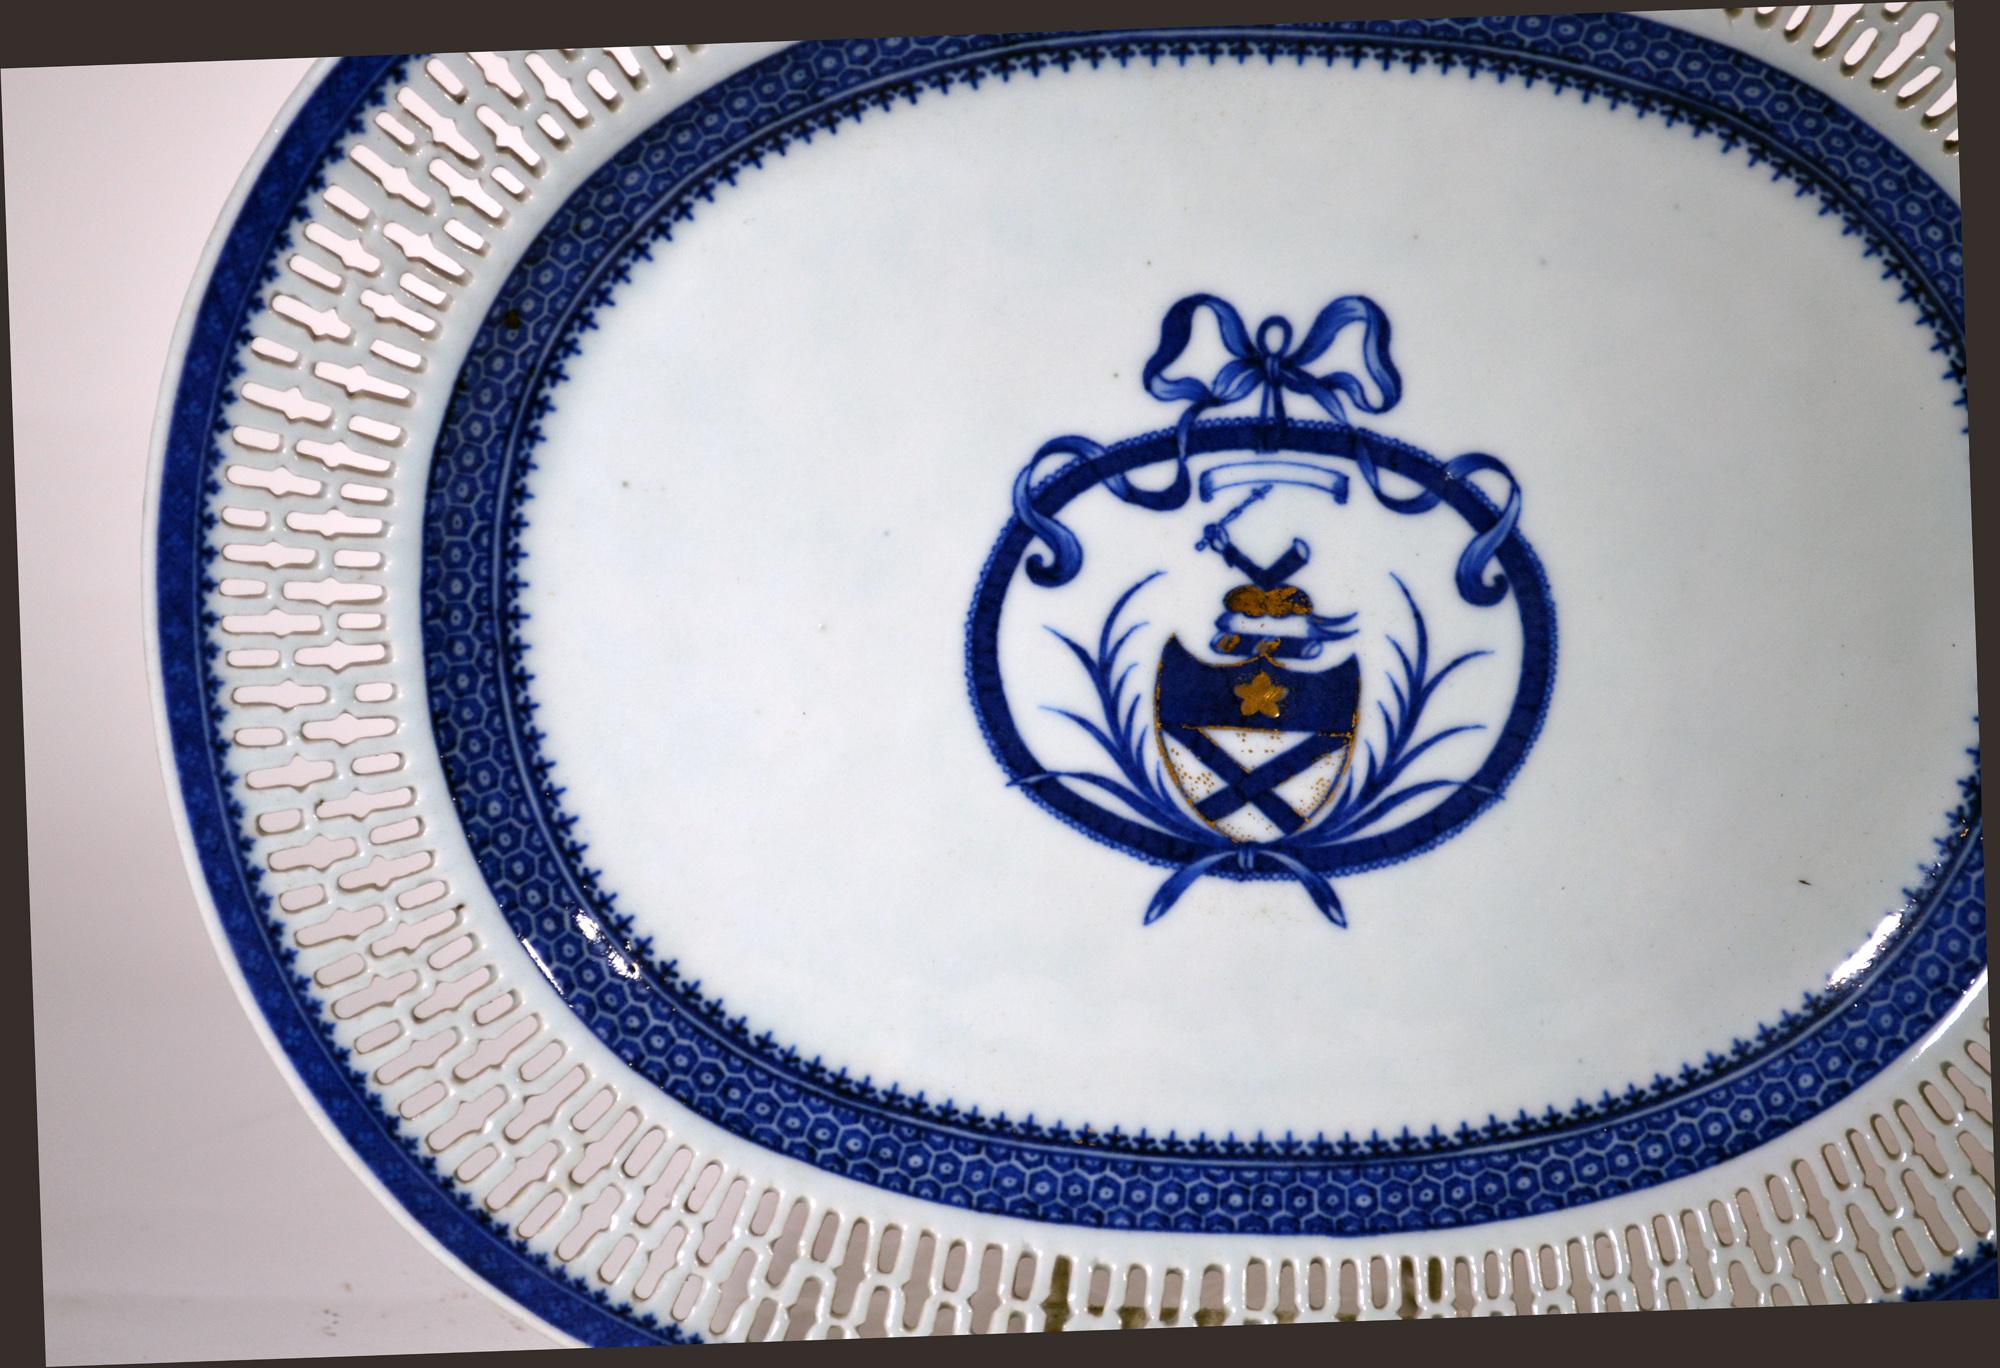 Chinese Export Porcelain large armorial blue & white openwork dishes,
Arms of Bruce,
Circa 1790

The large Chinese Export oval porcelain armorial dishes have a central armorial device in the center with gilt highlights. The border with spearhead